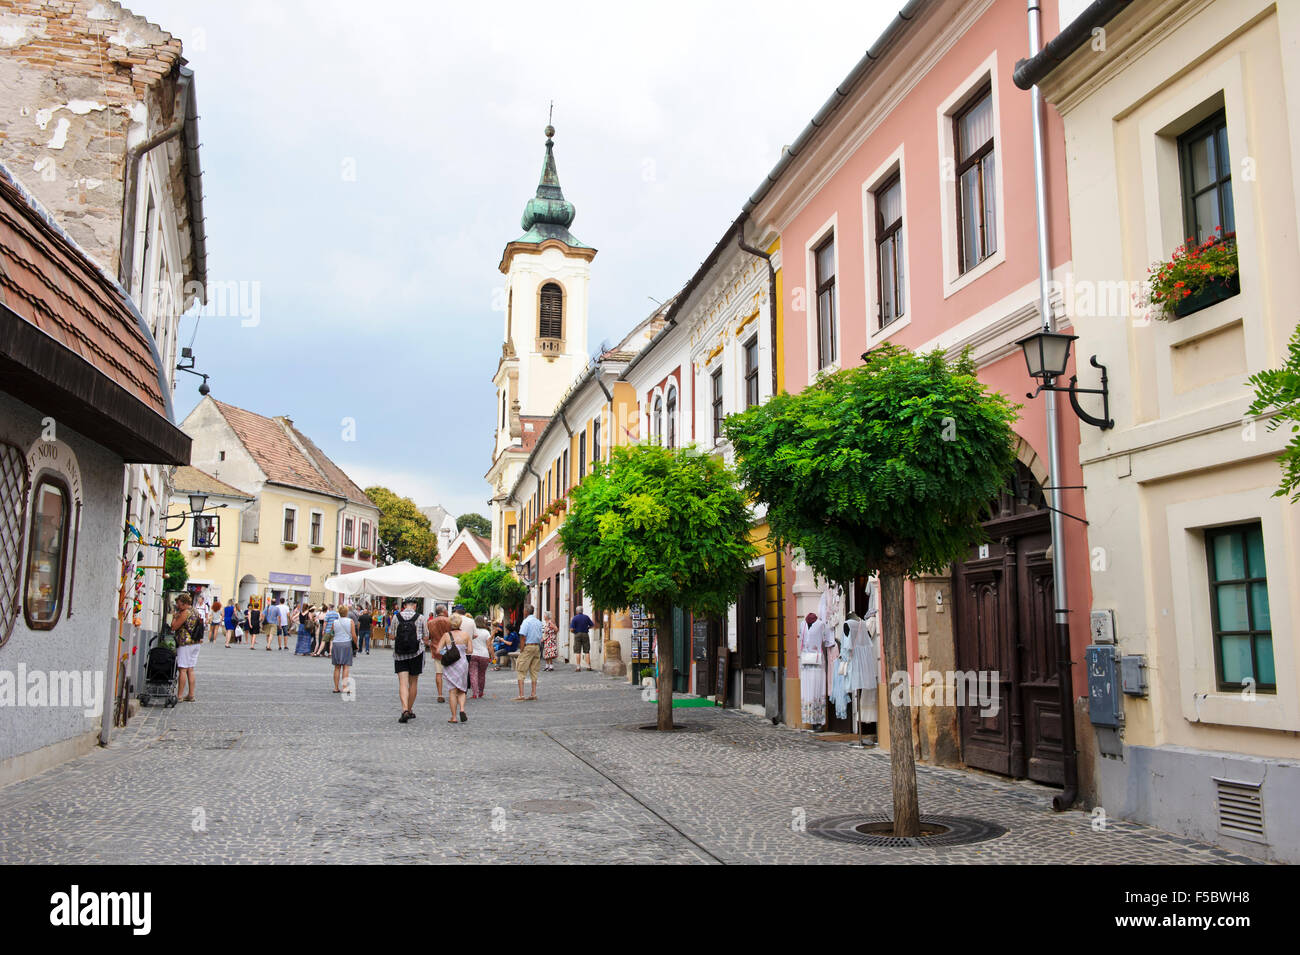 The picturesque village of Szentendre, Hungary Stock Photo